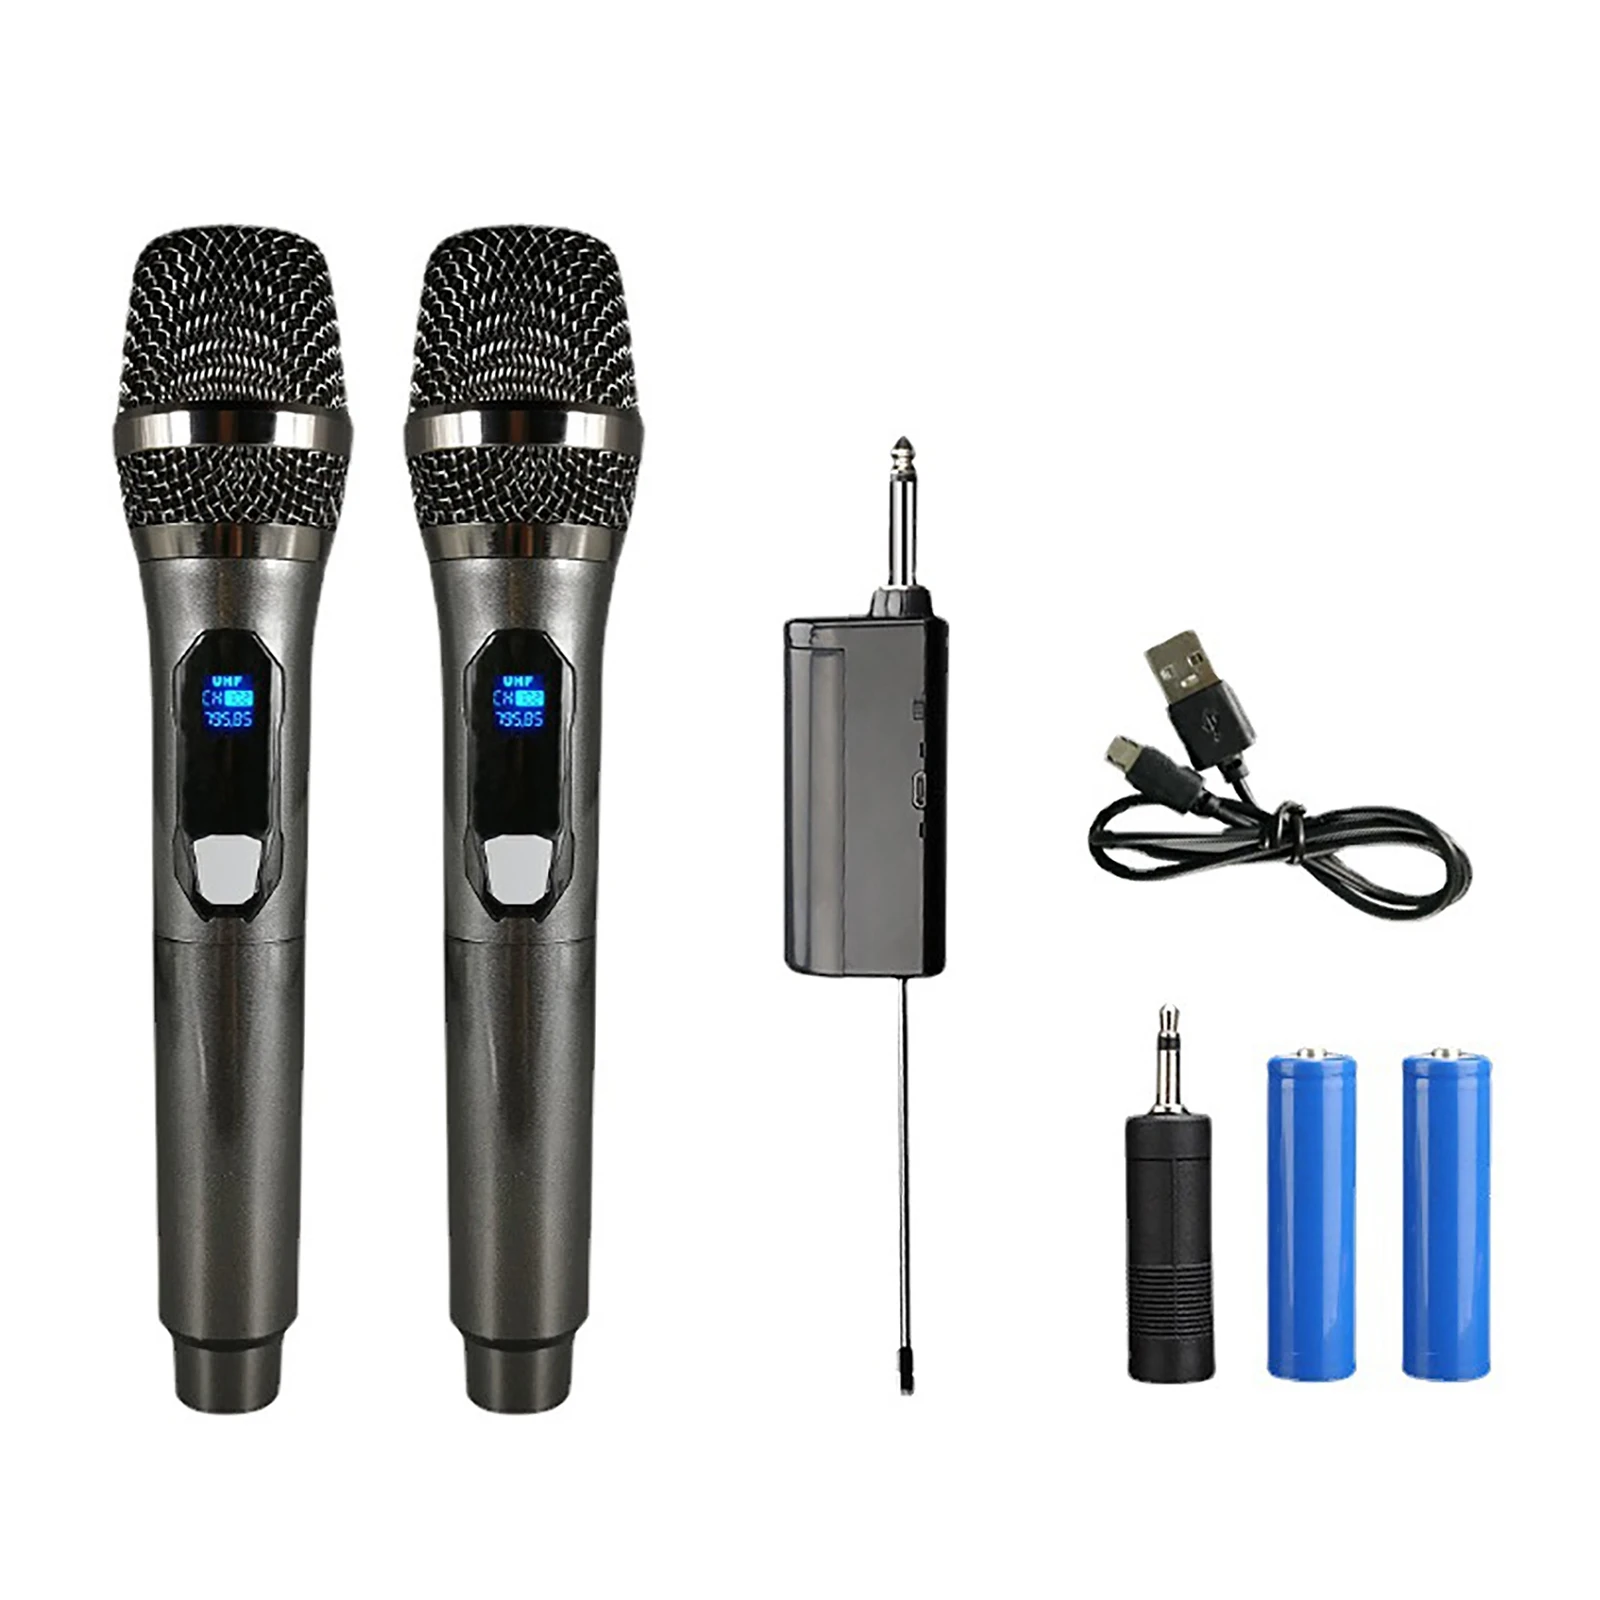 

Wireless Microphone Rechargeable VHF Recording Karaoke Handheld Range Wireless Dynamic Mic For Singing Church Home Party KTV